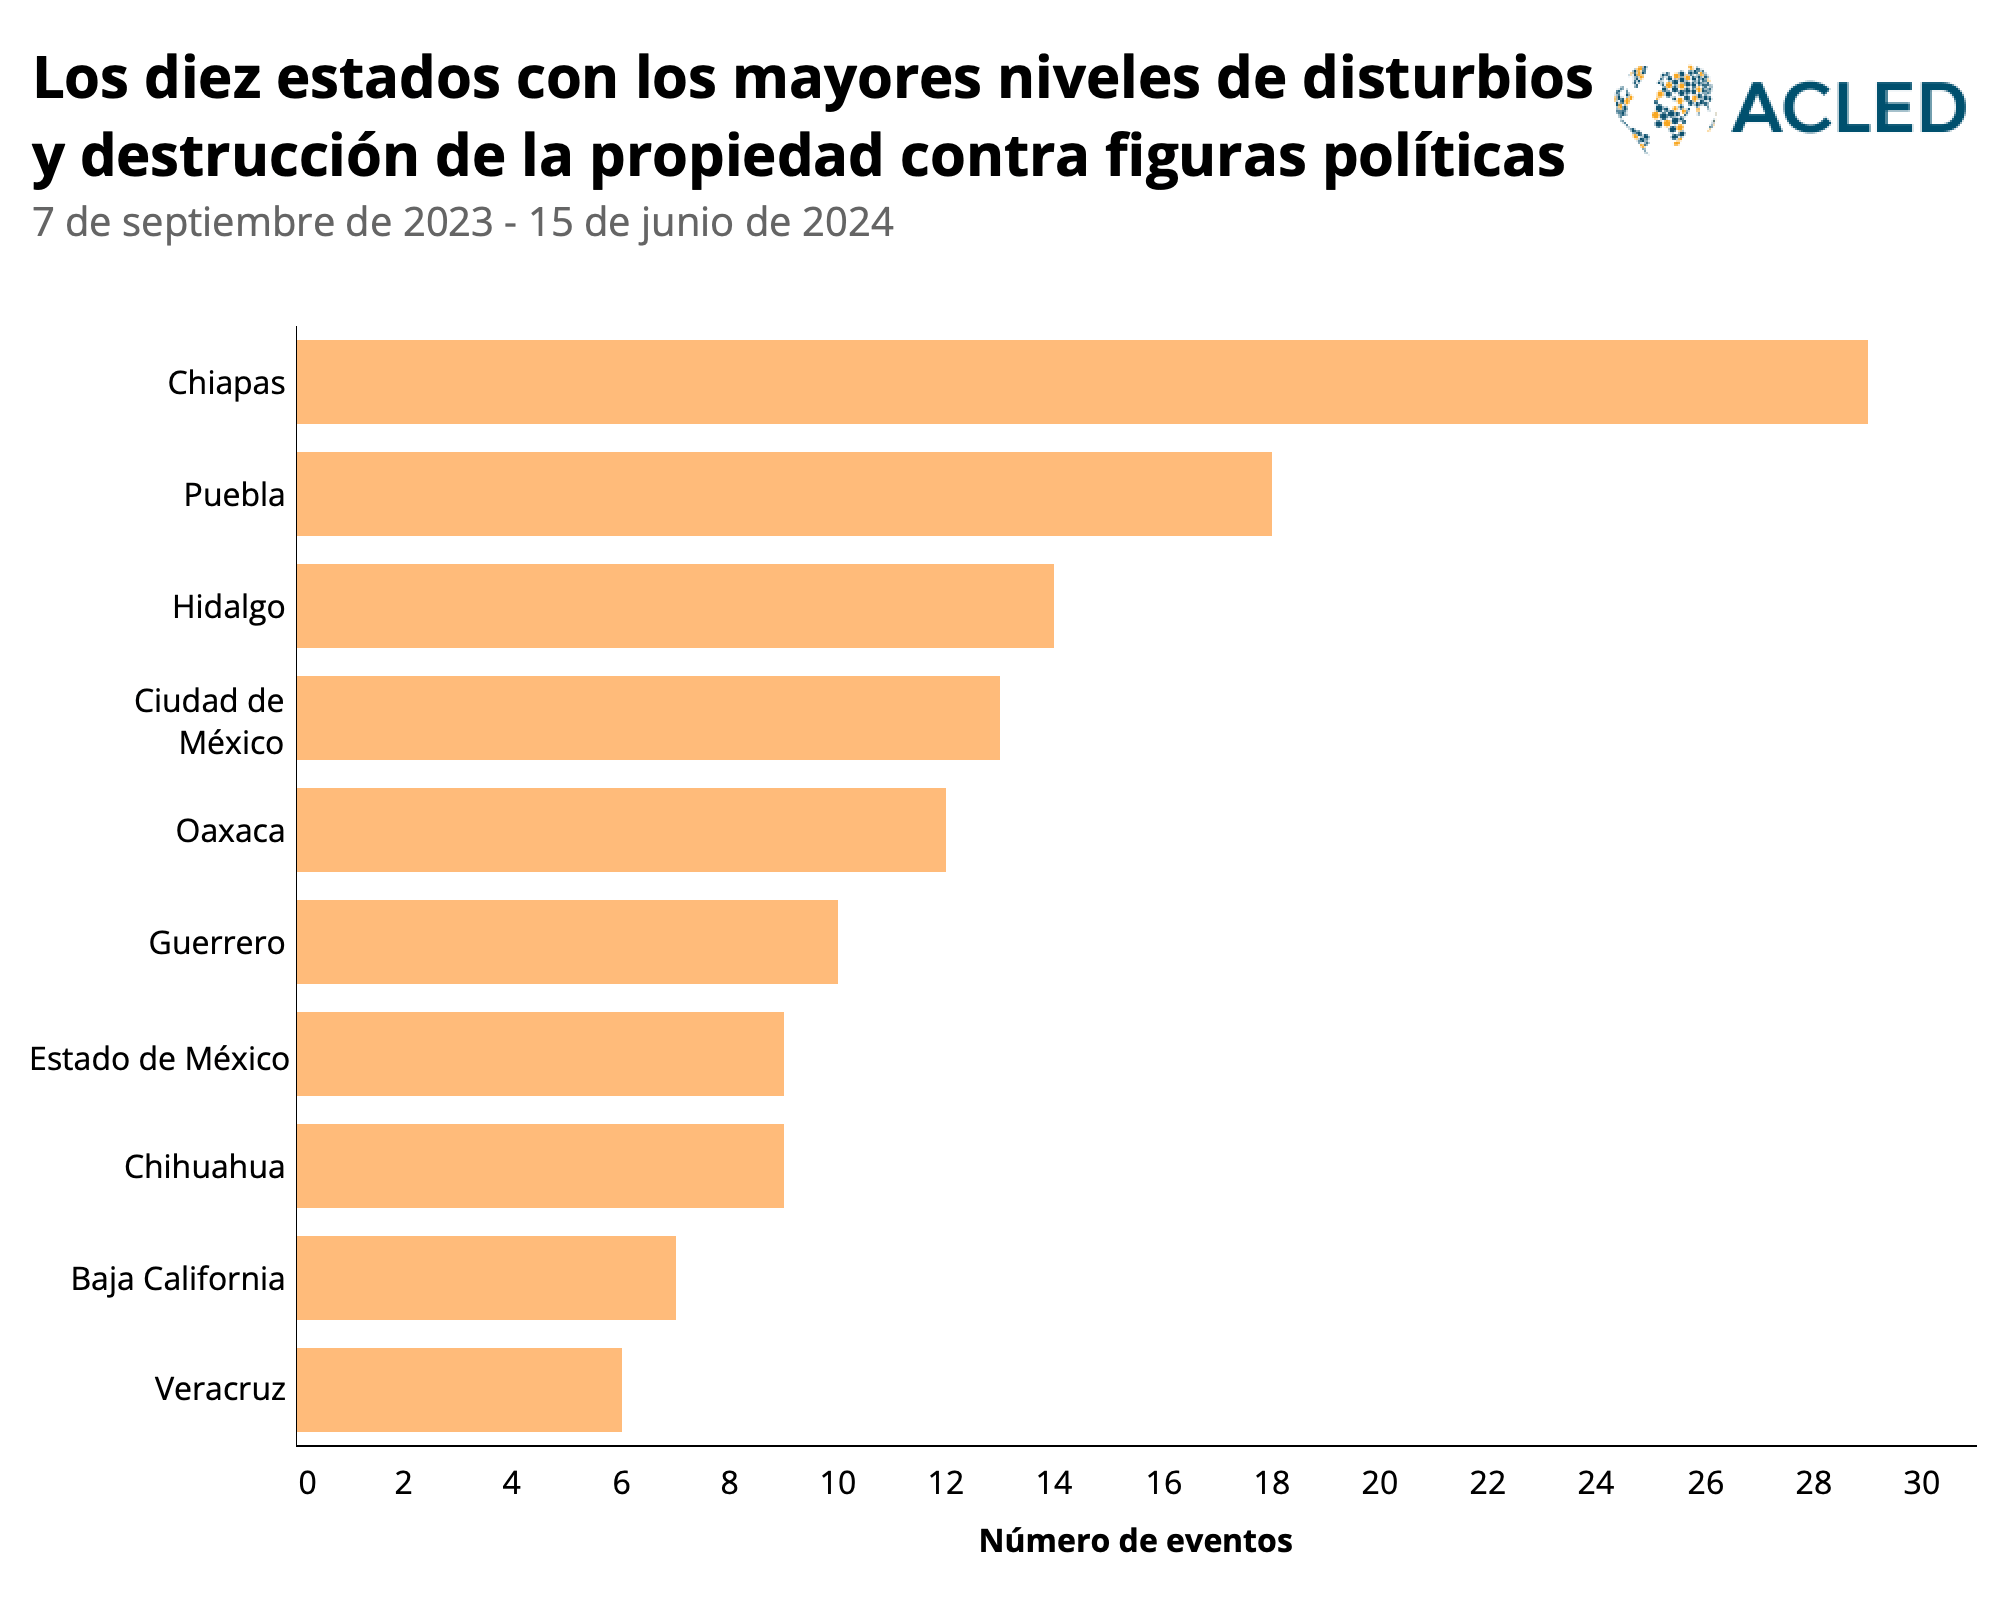 Bar graph - Top 10 state with highest levels of riots and property destruction targeting political figures - 7 Sept 2023 - 15 June 2024 - Spanish